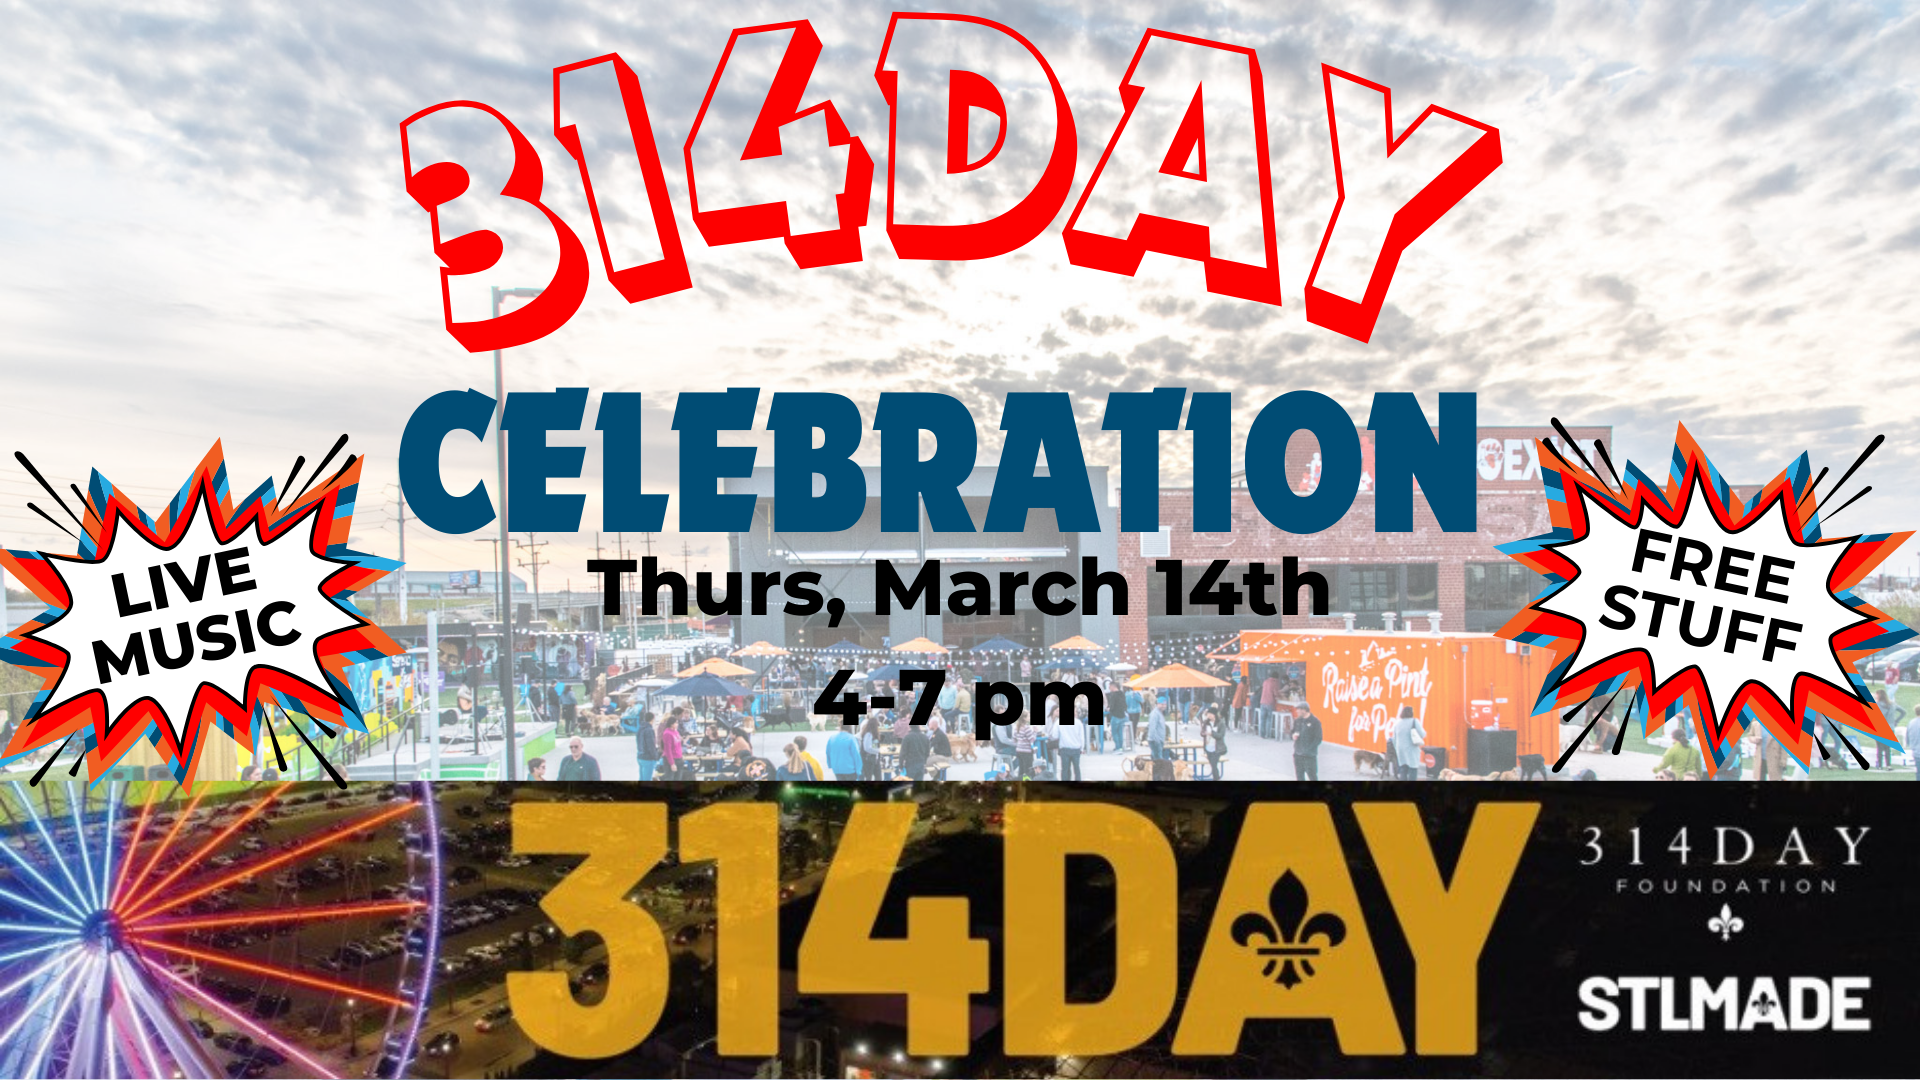 314 Day celebration from 4 to 7 pm on thursday, march 14th